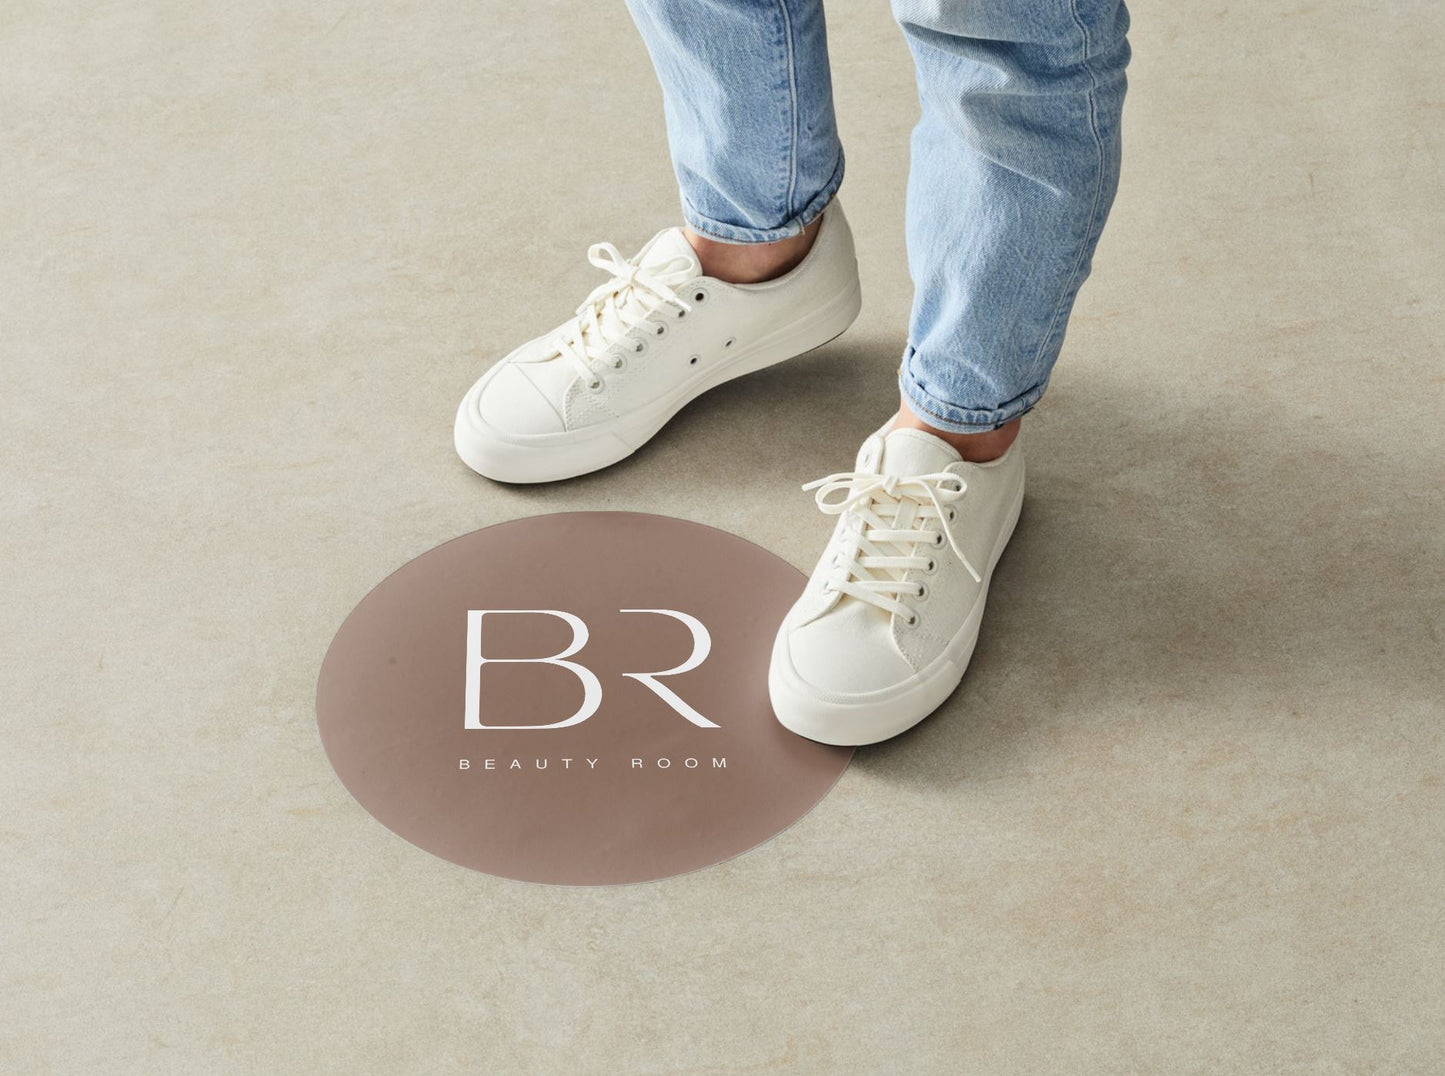 Floor Or Wall Decal Sticker